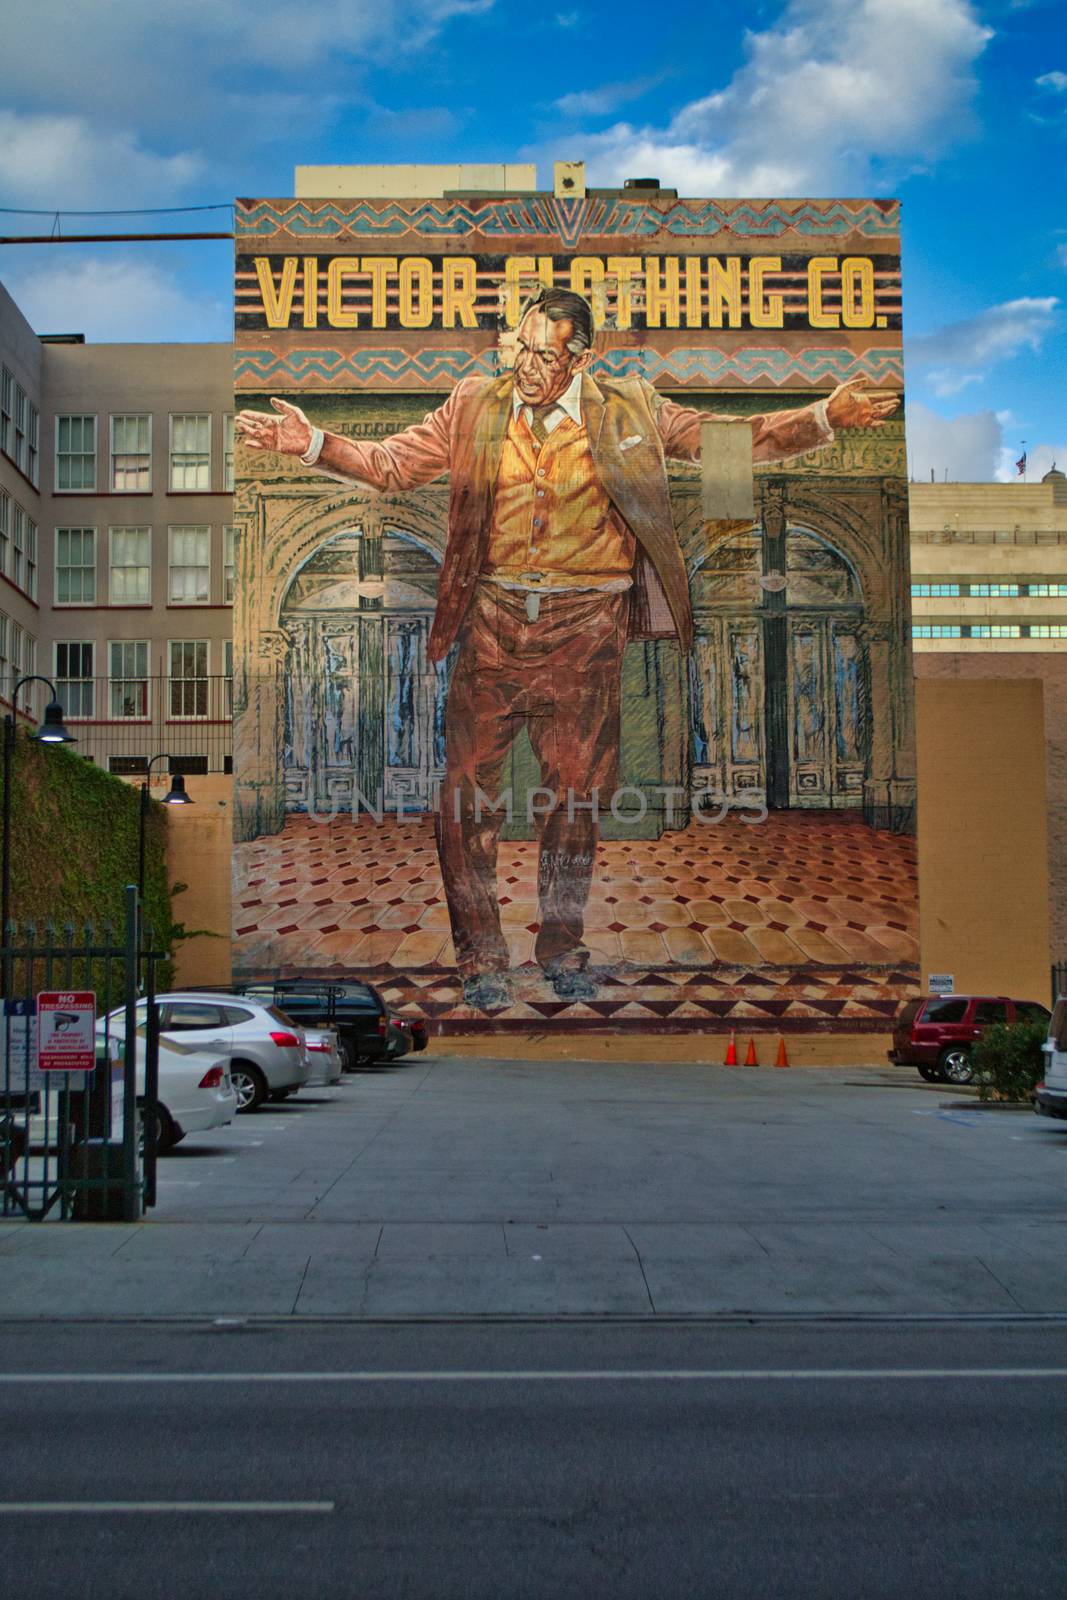 Victor Clothing Co Mural at Broadway Ave, Los Angeles, California, USA by kb79